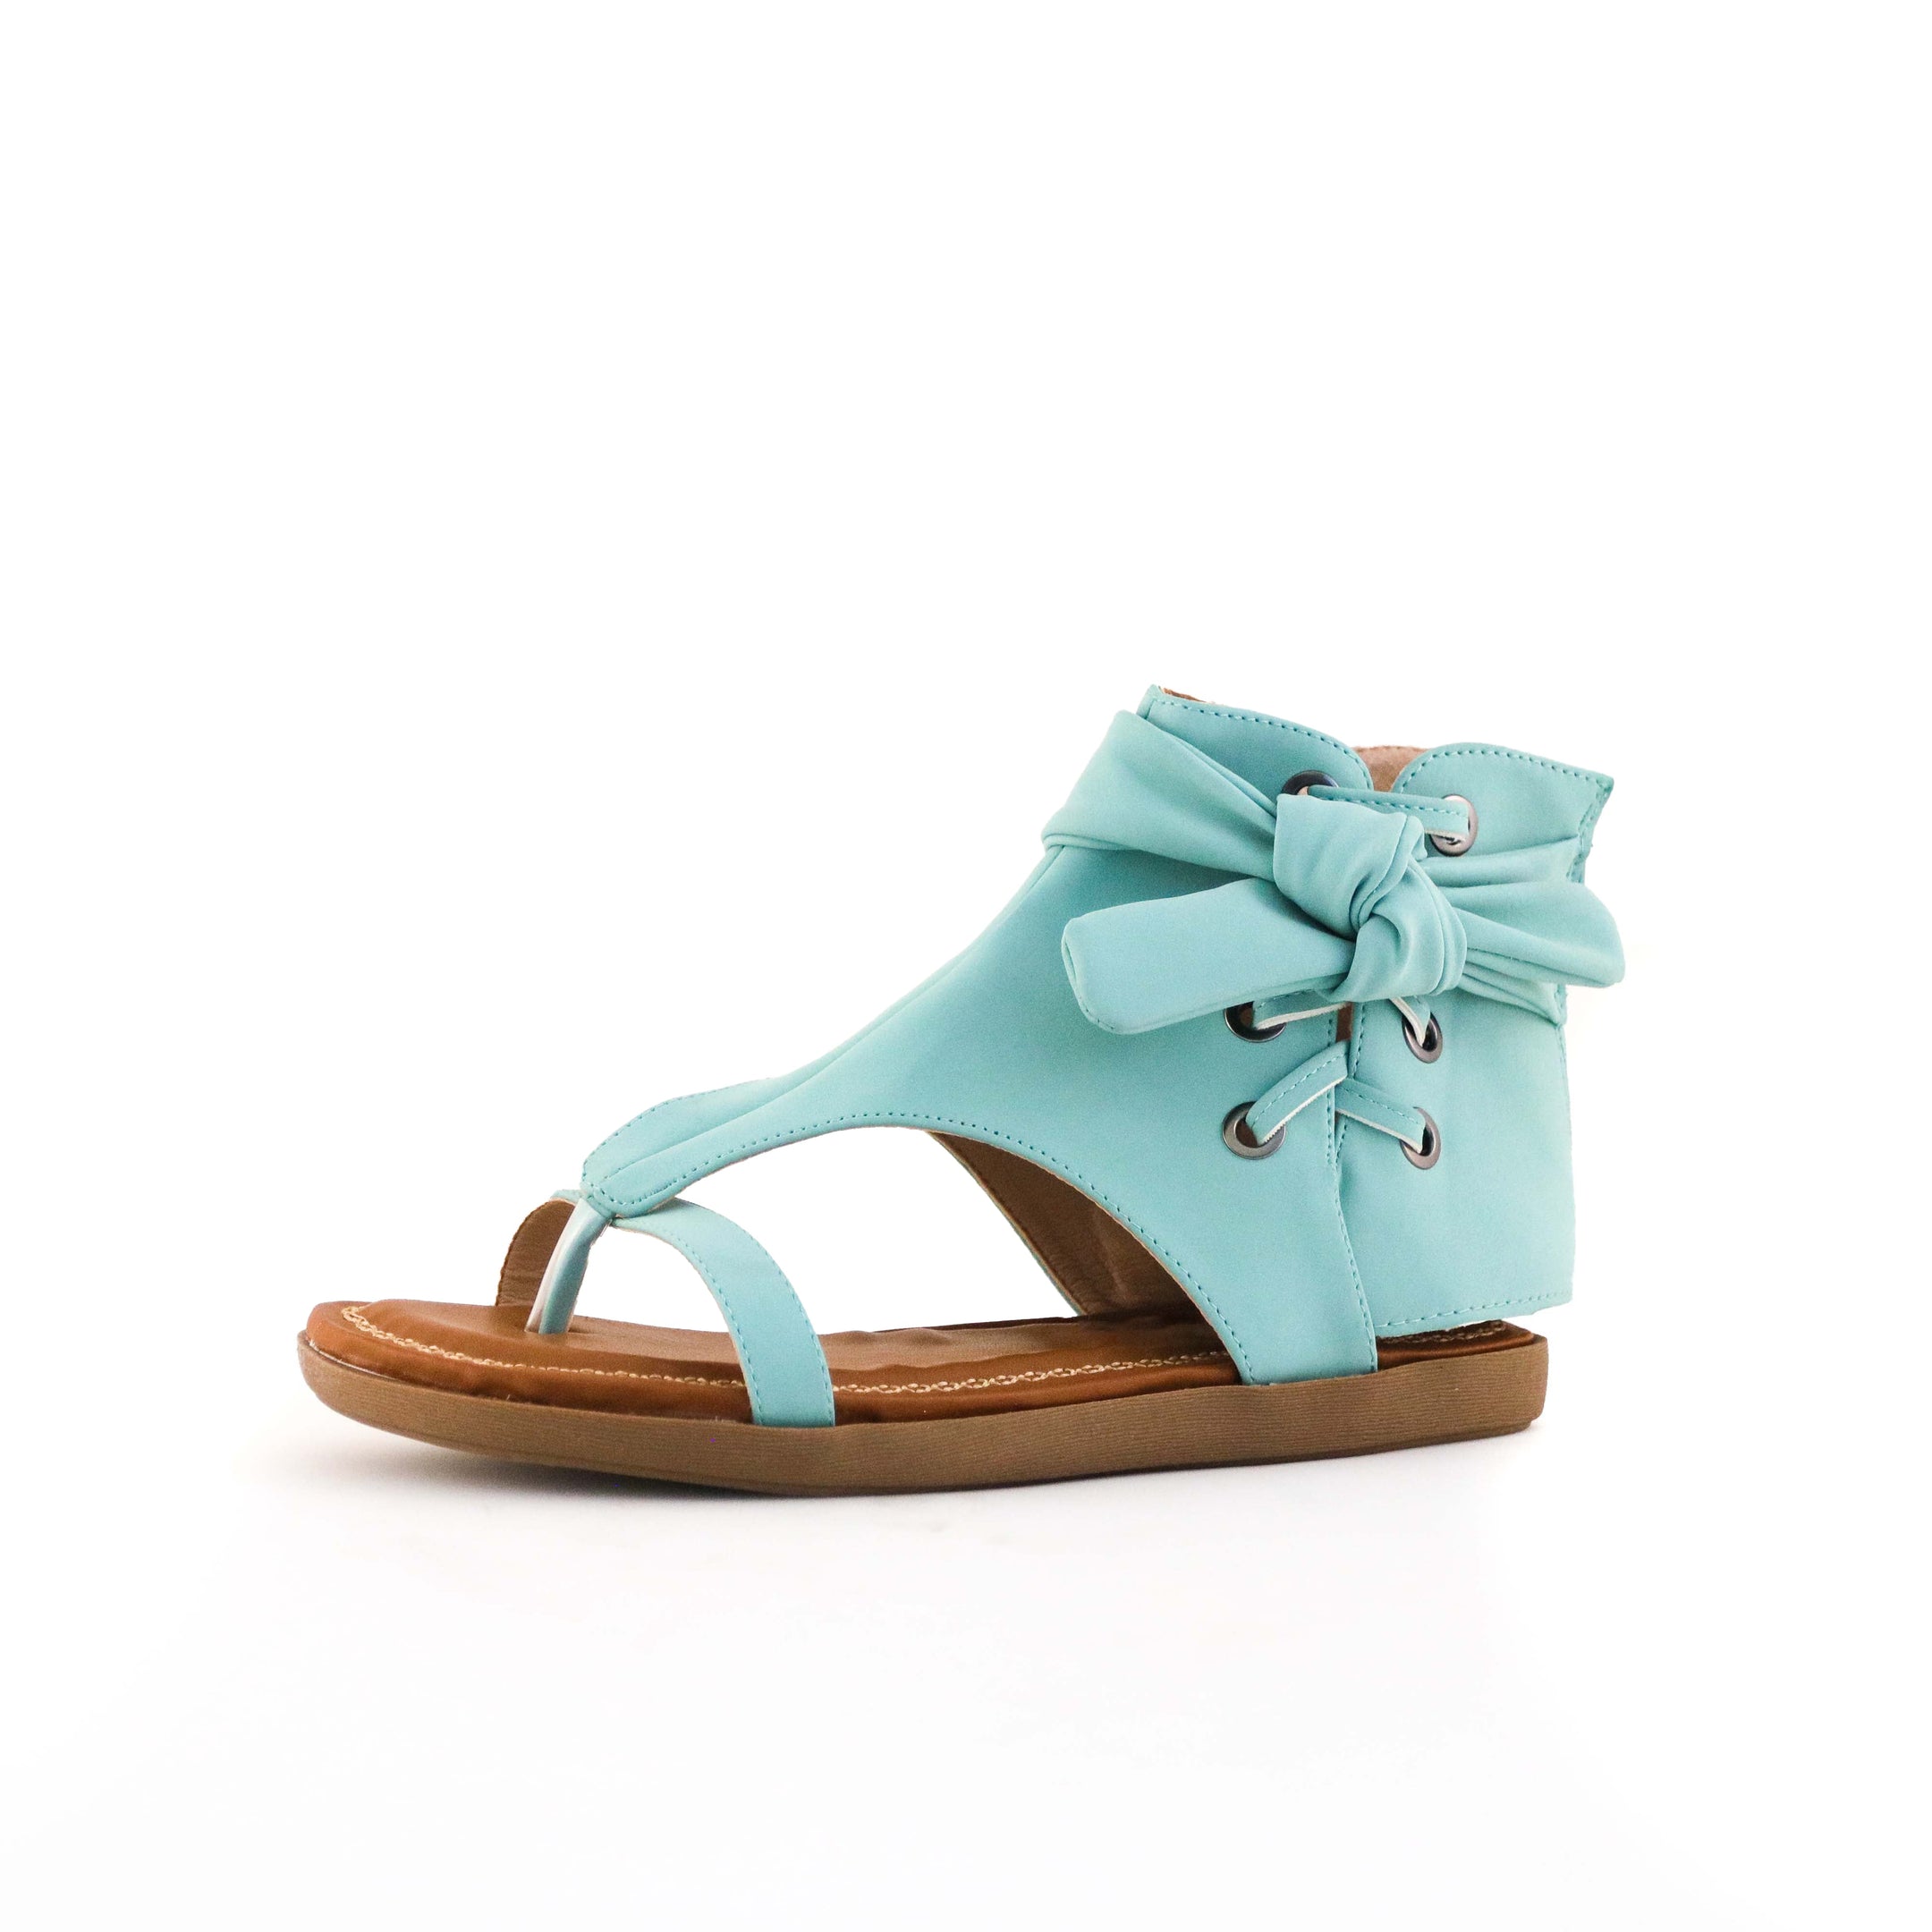 Buy Women's Chi Lace Detail Gladiator Sandal Turquoise by Nest Shoes